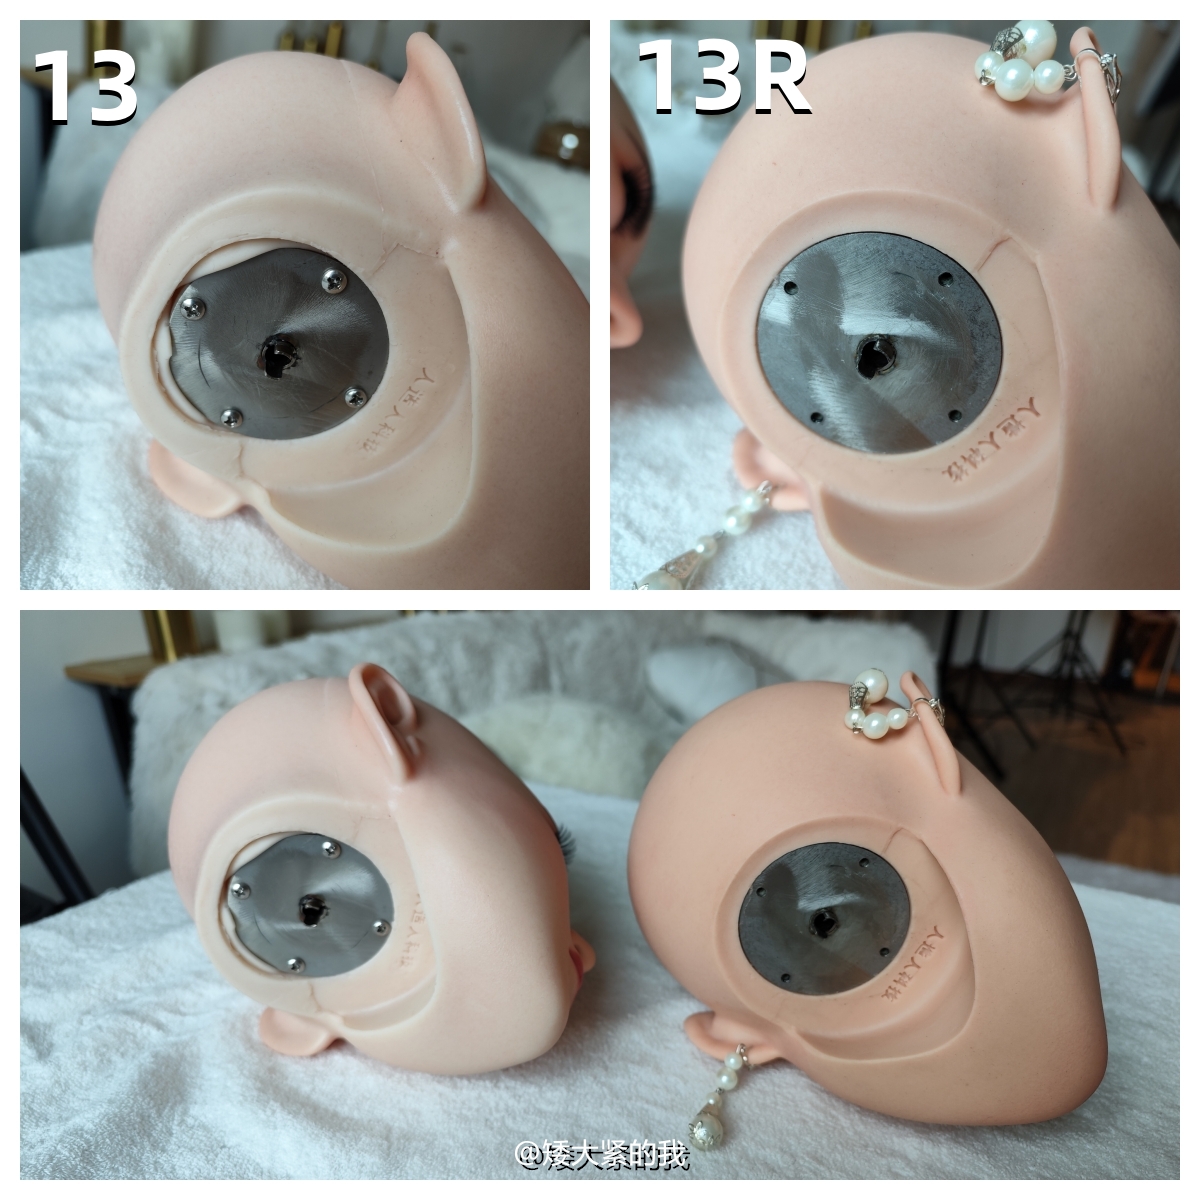 Gynoid Doll RZR|Realistic Silicone Sex Doll|Light Shooting|Head Sculpture|Head Carving|Connector|Lisa|Lori|13R|Doll Skin|M16|M8